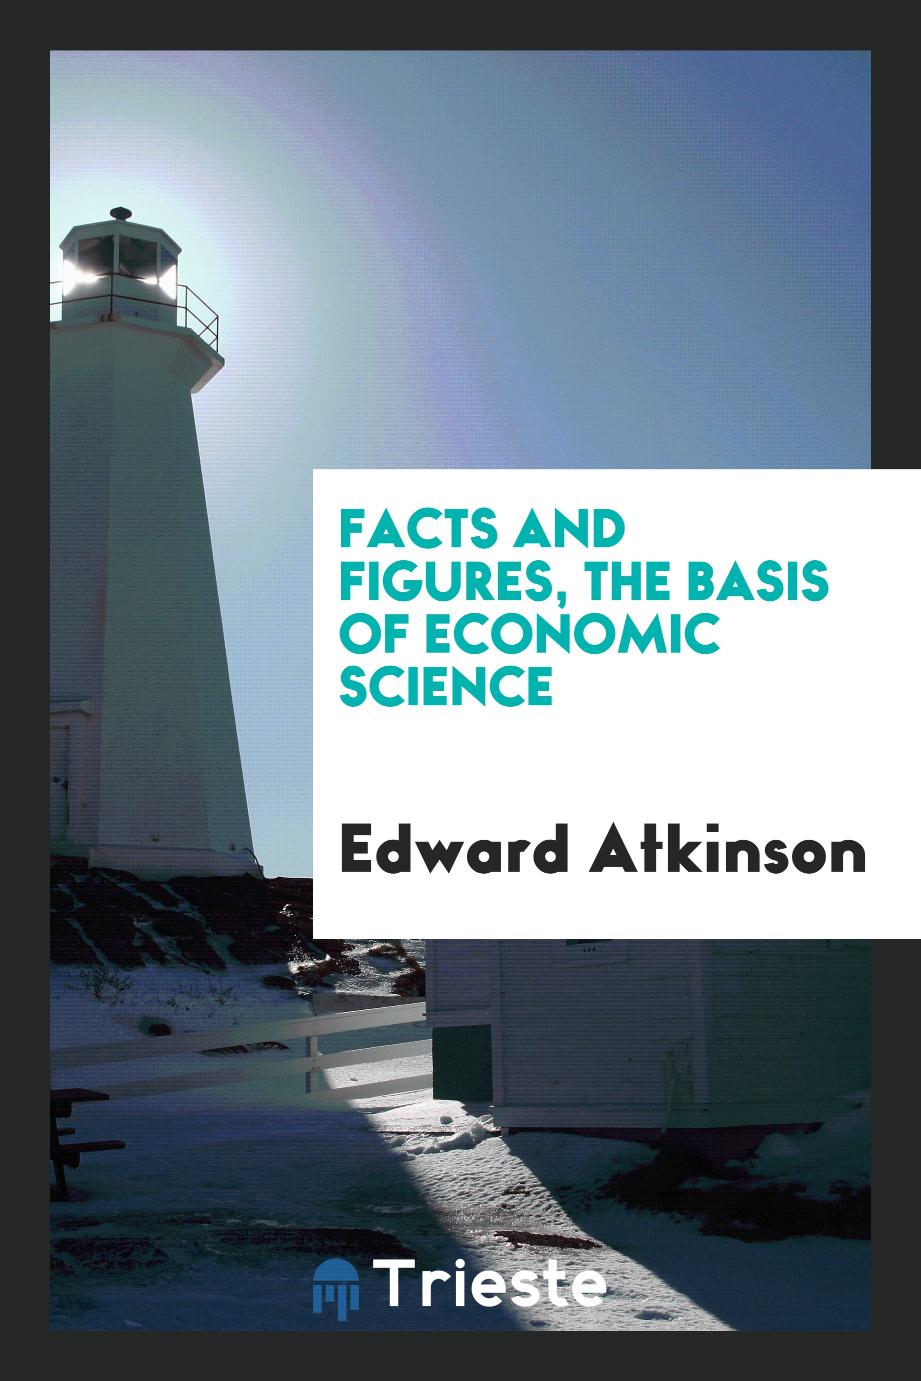 Facts and figures, the basis of economic science